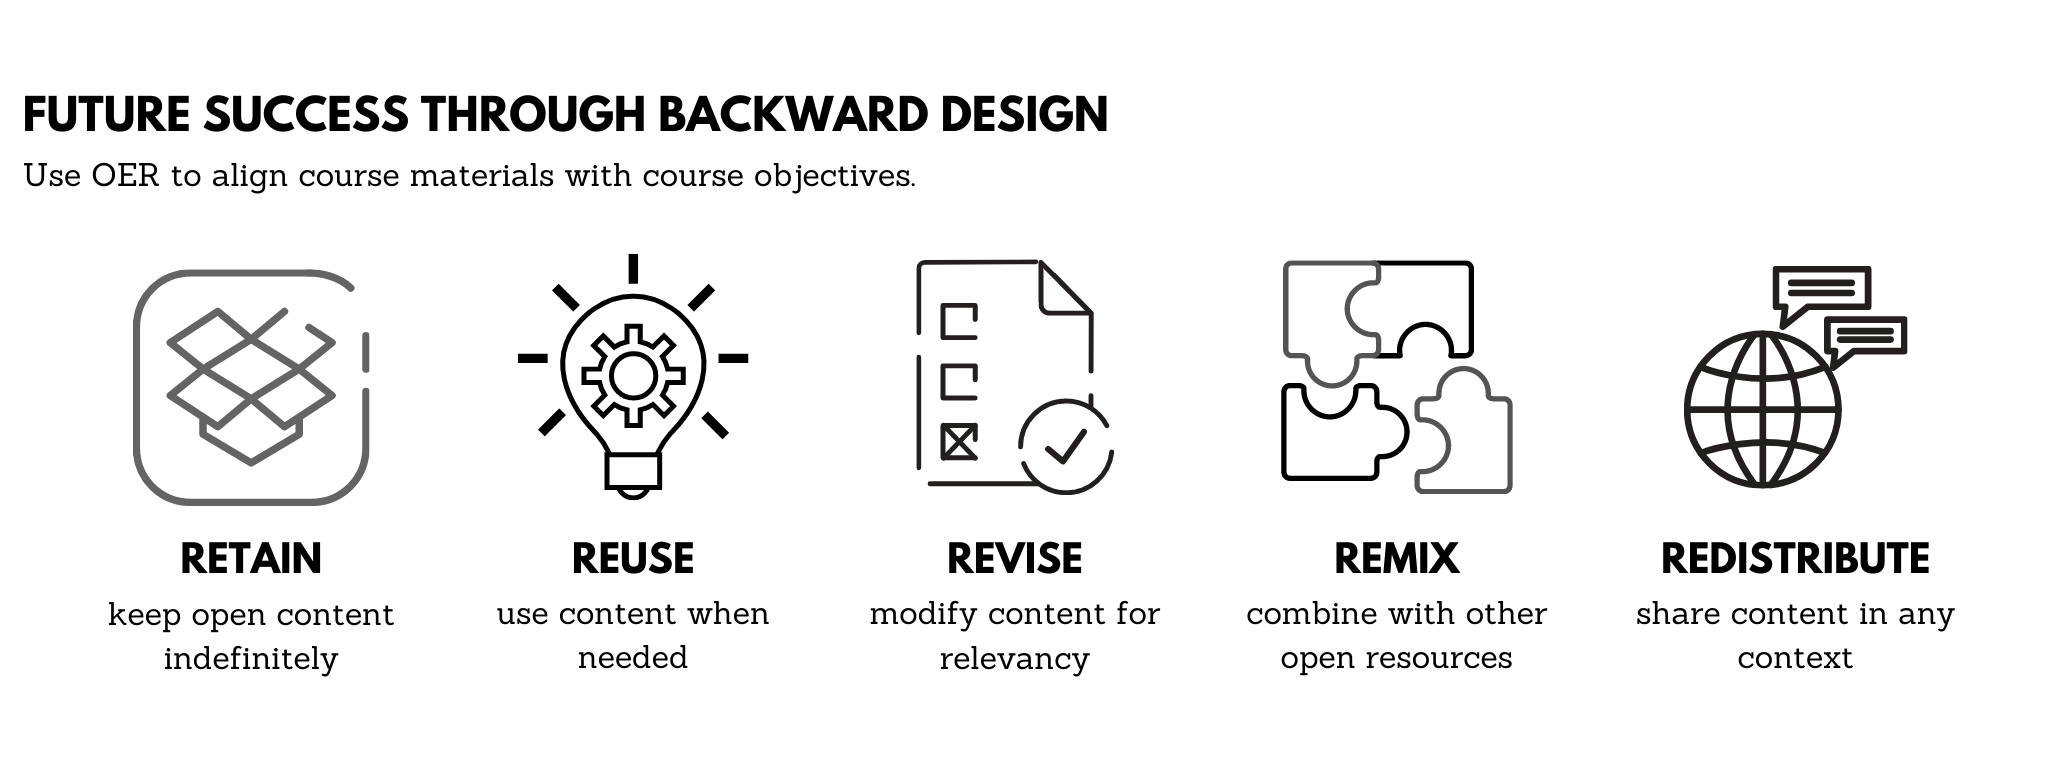 Future success through backward design. Use OER to align course materials with course objectives. Retain keep open content indefinitely, Reuse use content when needed, revise modify content for relevancy, Remix combine with other open resources, Redistribute share content in any context